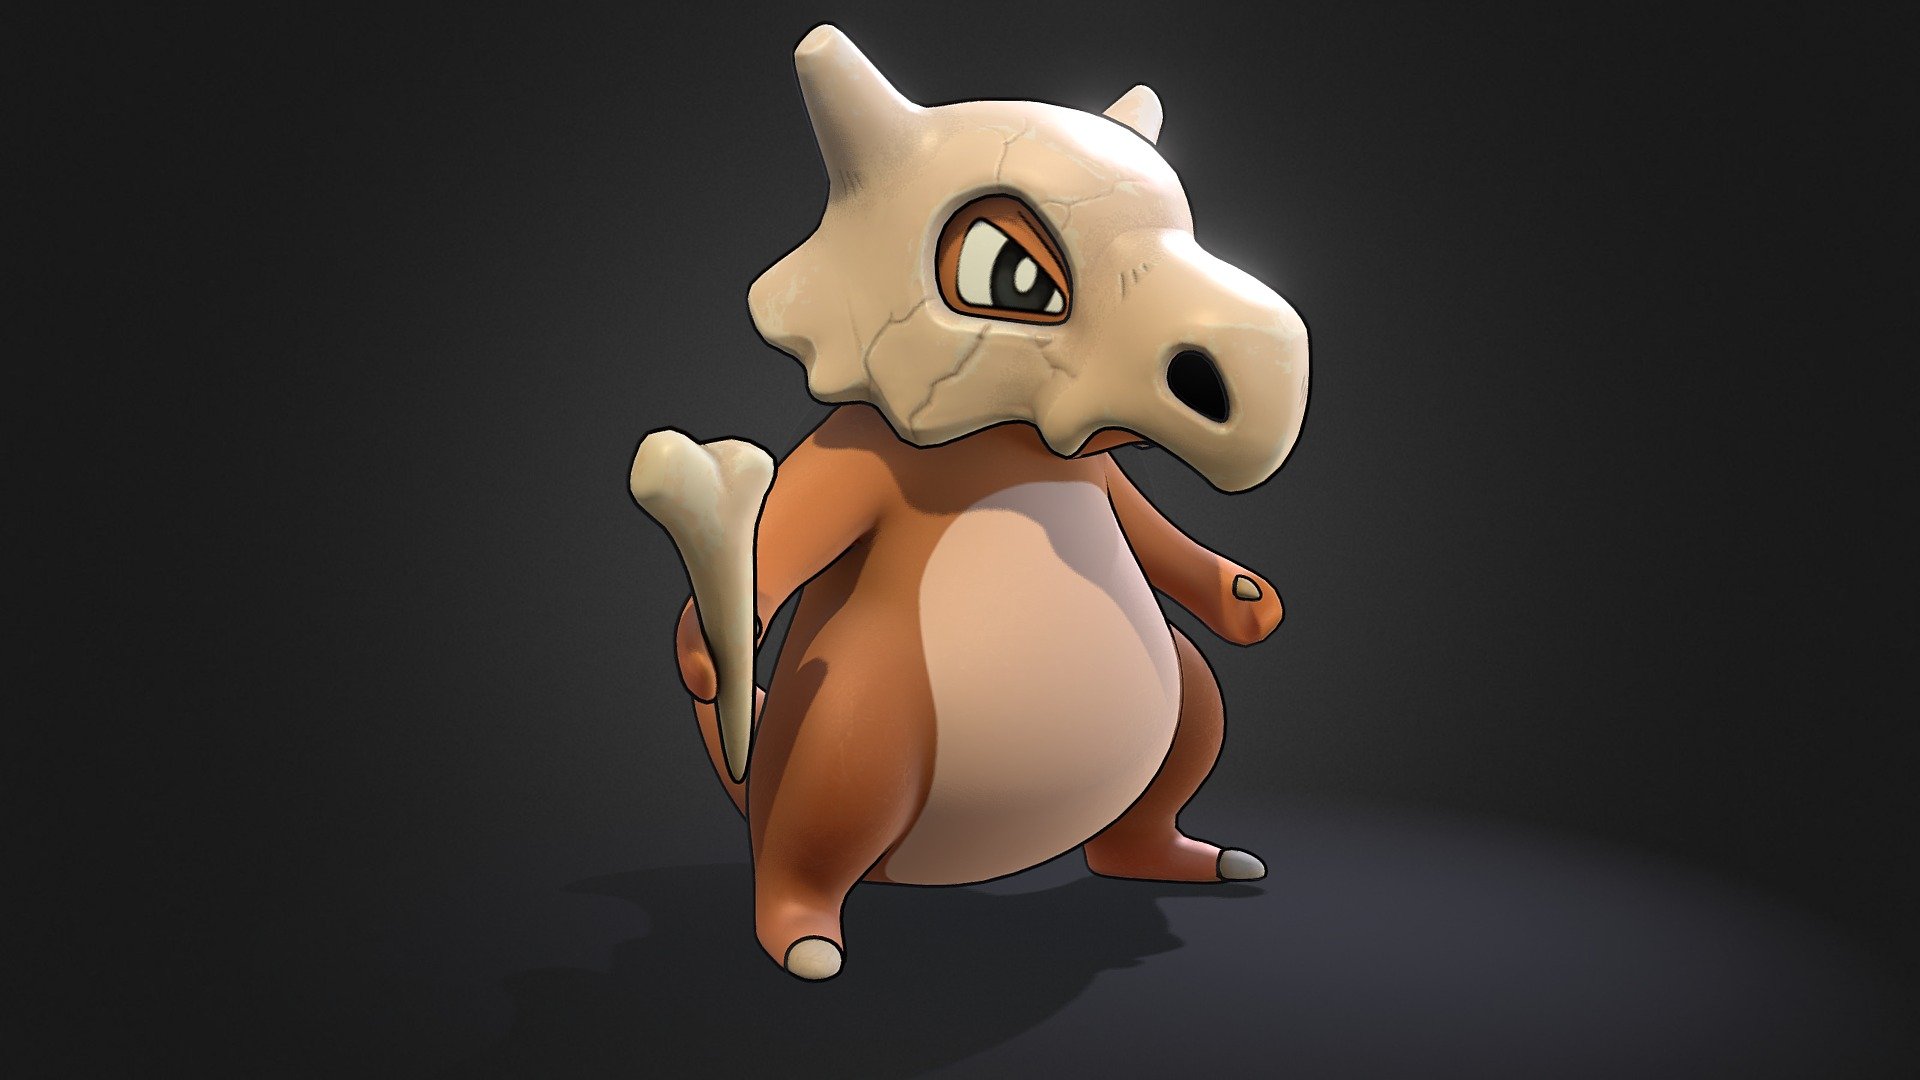 Stue Feasibility bjærgning Cubone Pokemon - Buy Royalty Free 3D model by 3dlogicus (@3dlogicus)  [069138f]